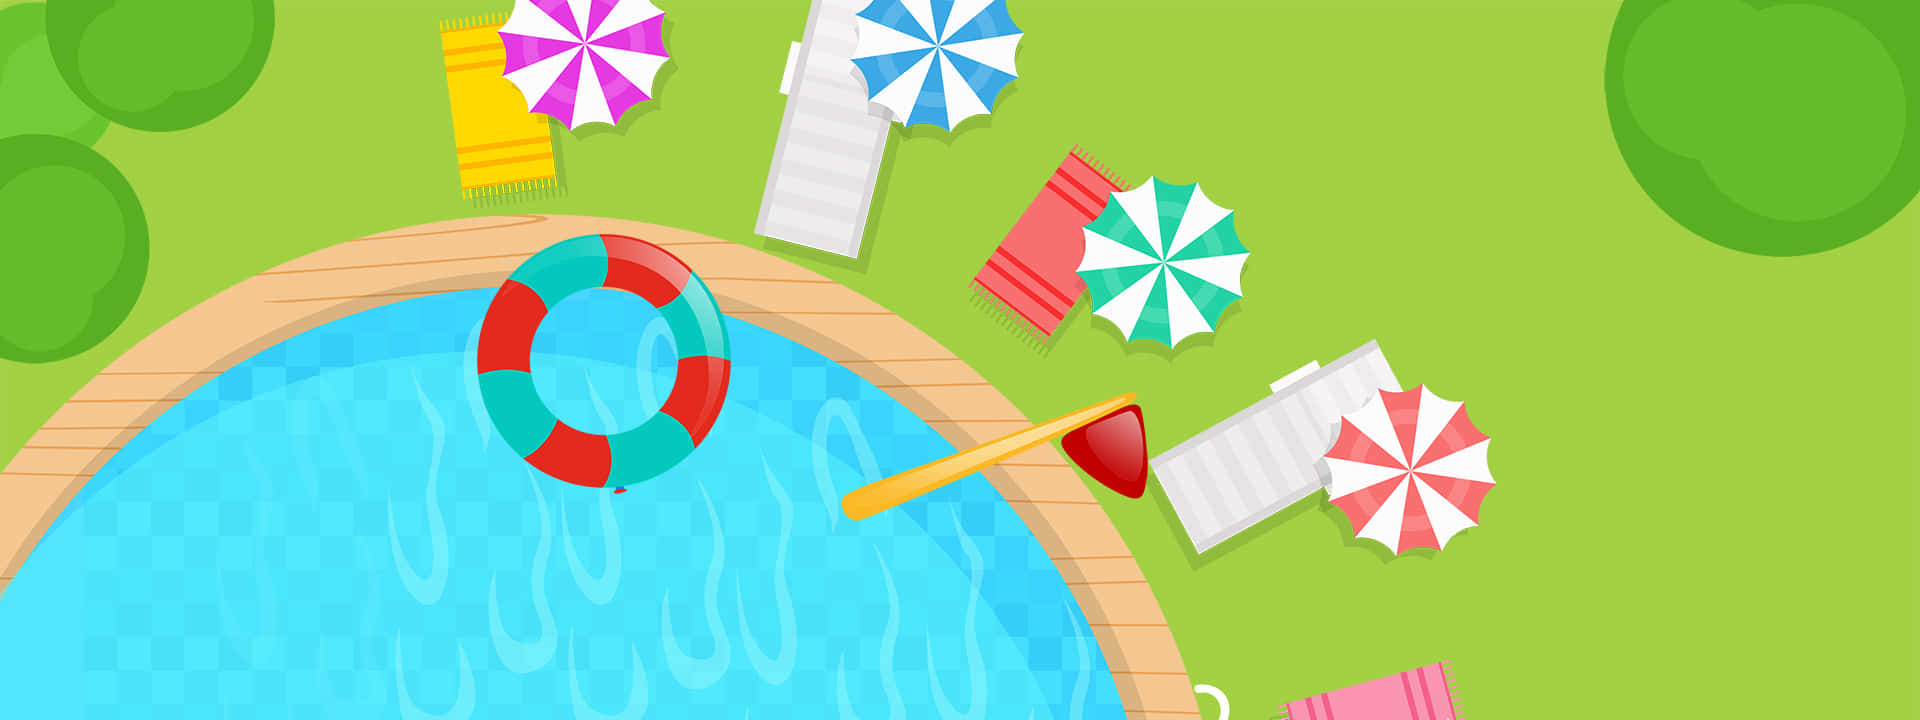 Flat Vector Pool Party Background